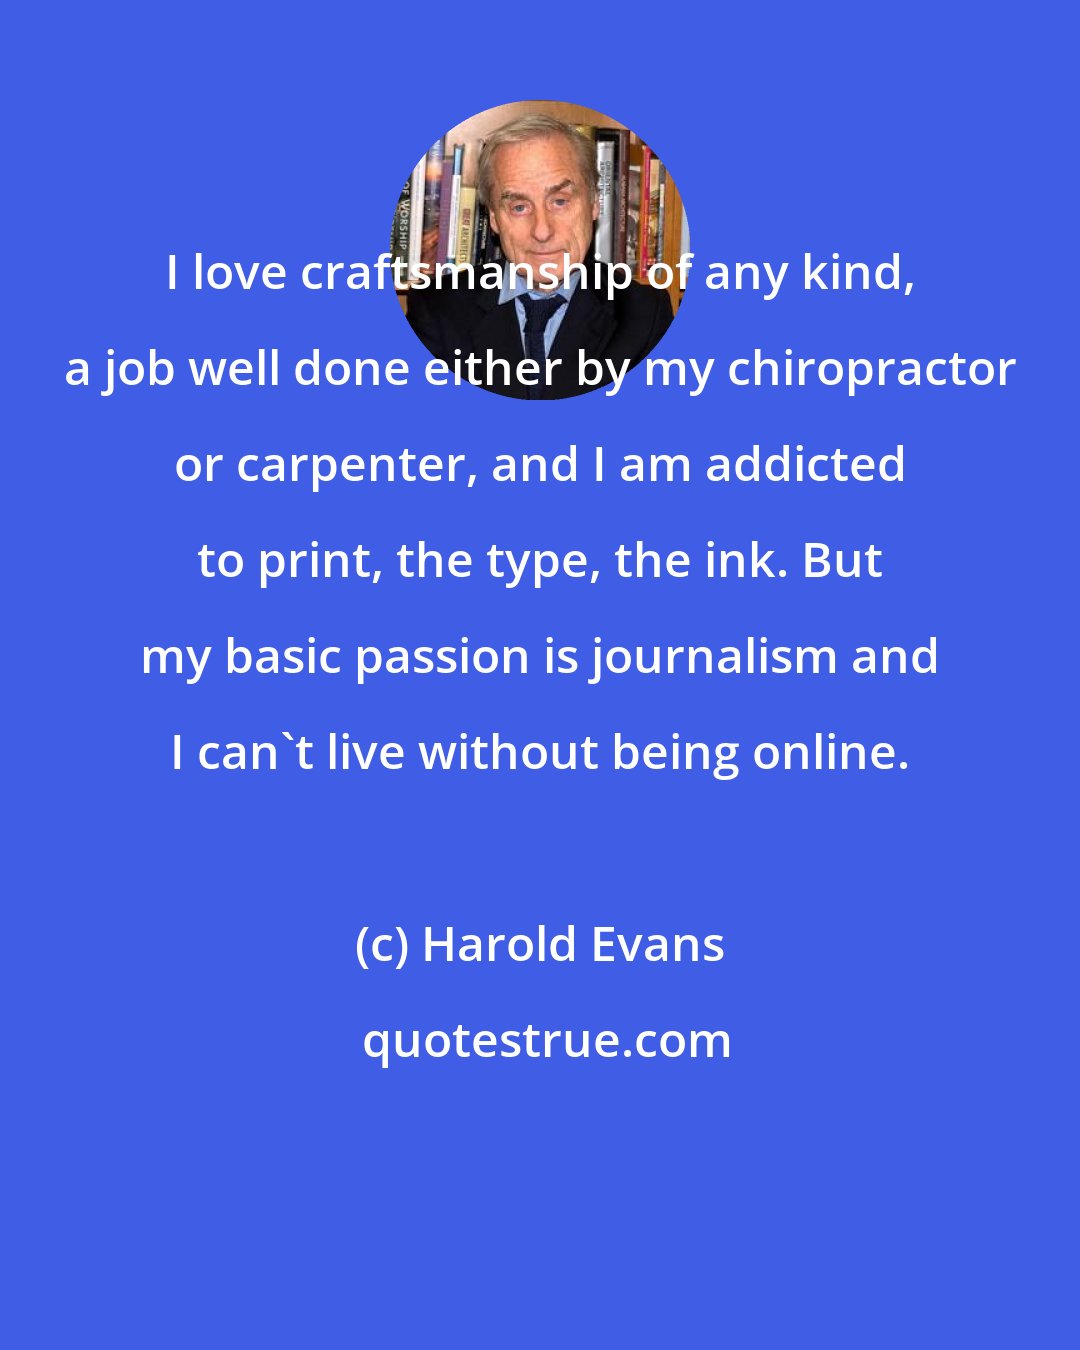 Harold Evans: I love craftsmanship of any kind, a job well done either by my chiropractor or carpenter, and I am addicted to print, the type, the ink. But my basic passion is journalism and I can't live without being online.